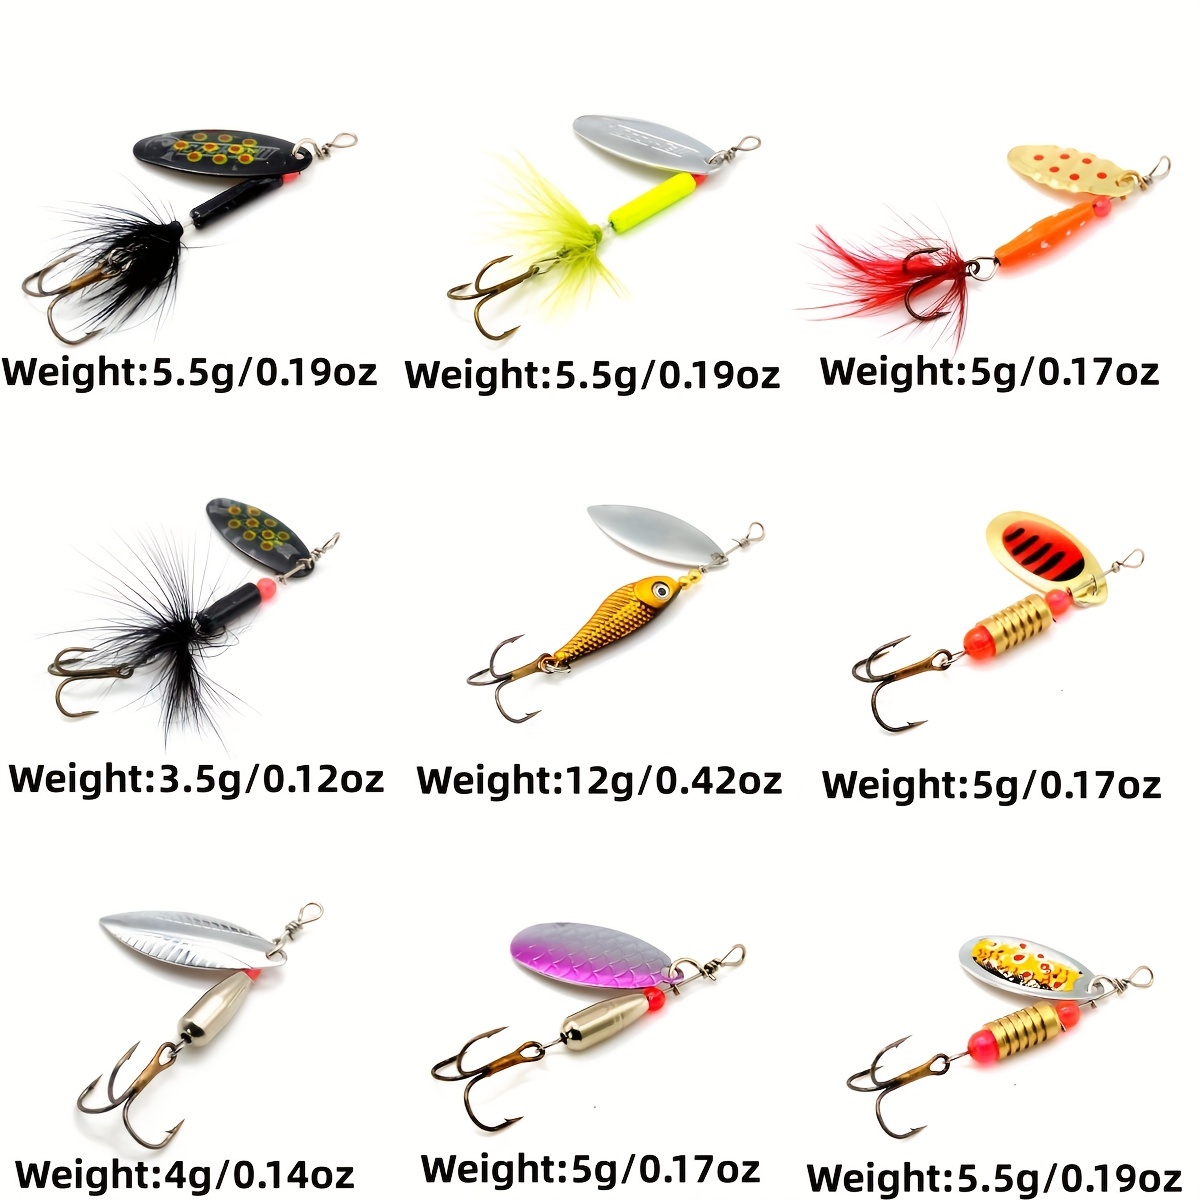 Spinnerbait Fishing Lures Set, 10pcs Hard Metal Baits with Rooster Tail and  Tackle Box, for Bass Trout Salmon Walleye in Freshwater and Saltwater